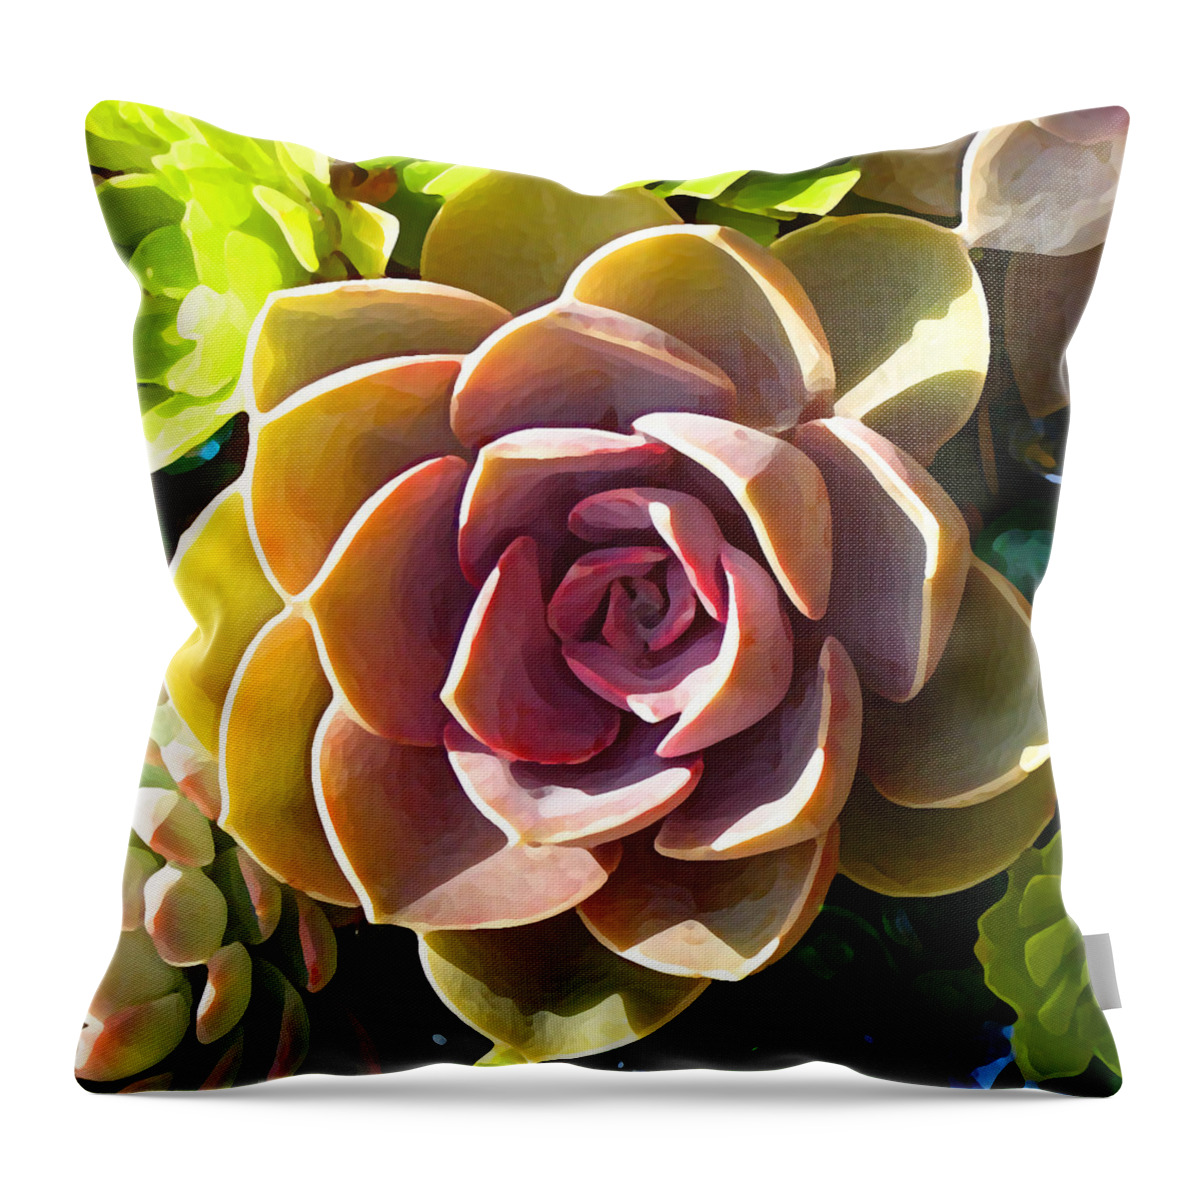 Succulent Throw Pillow featuring the photograph Succulent Pond 5 by Amy Vangsgard